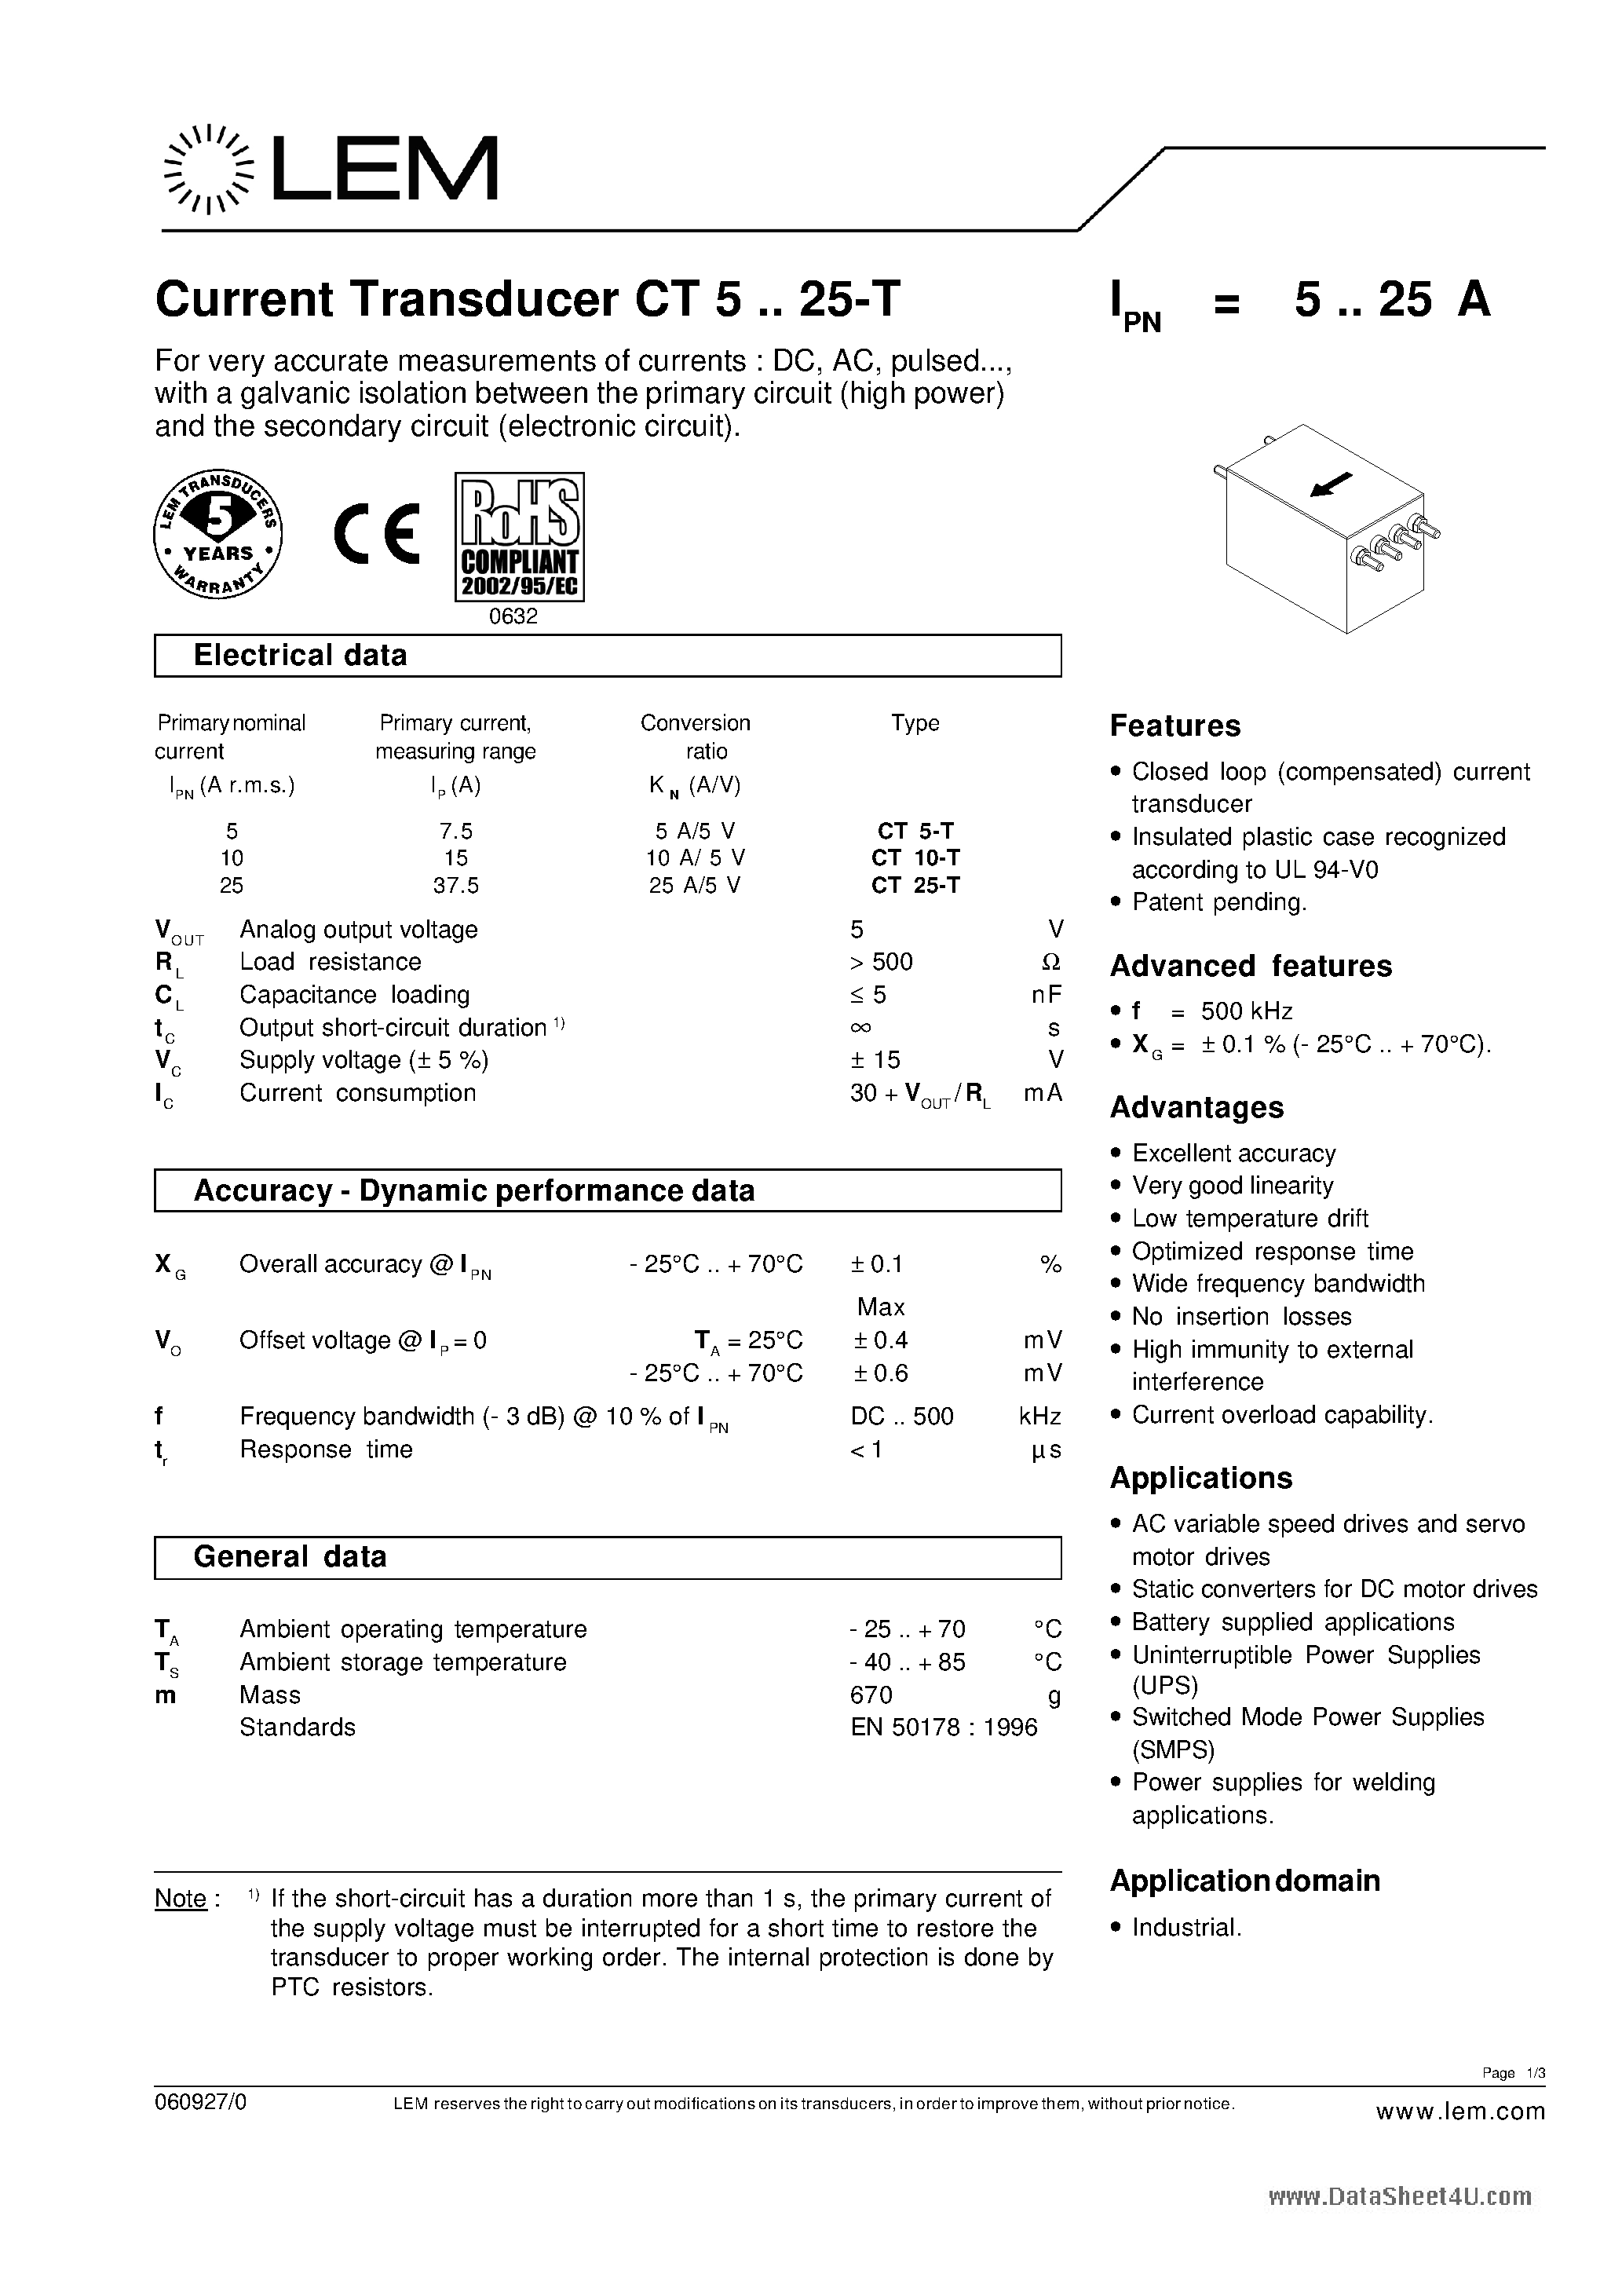 Datasheet CT25-T - Current Transducer page 1